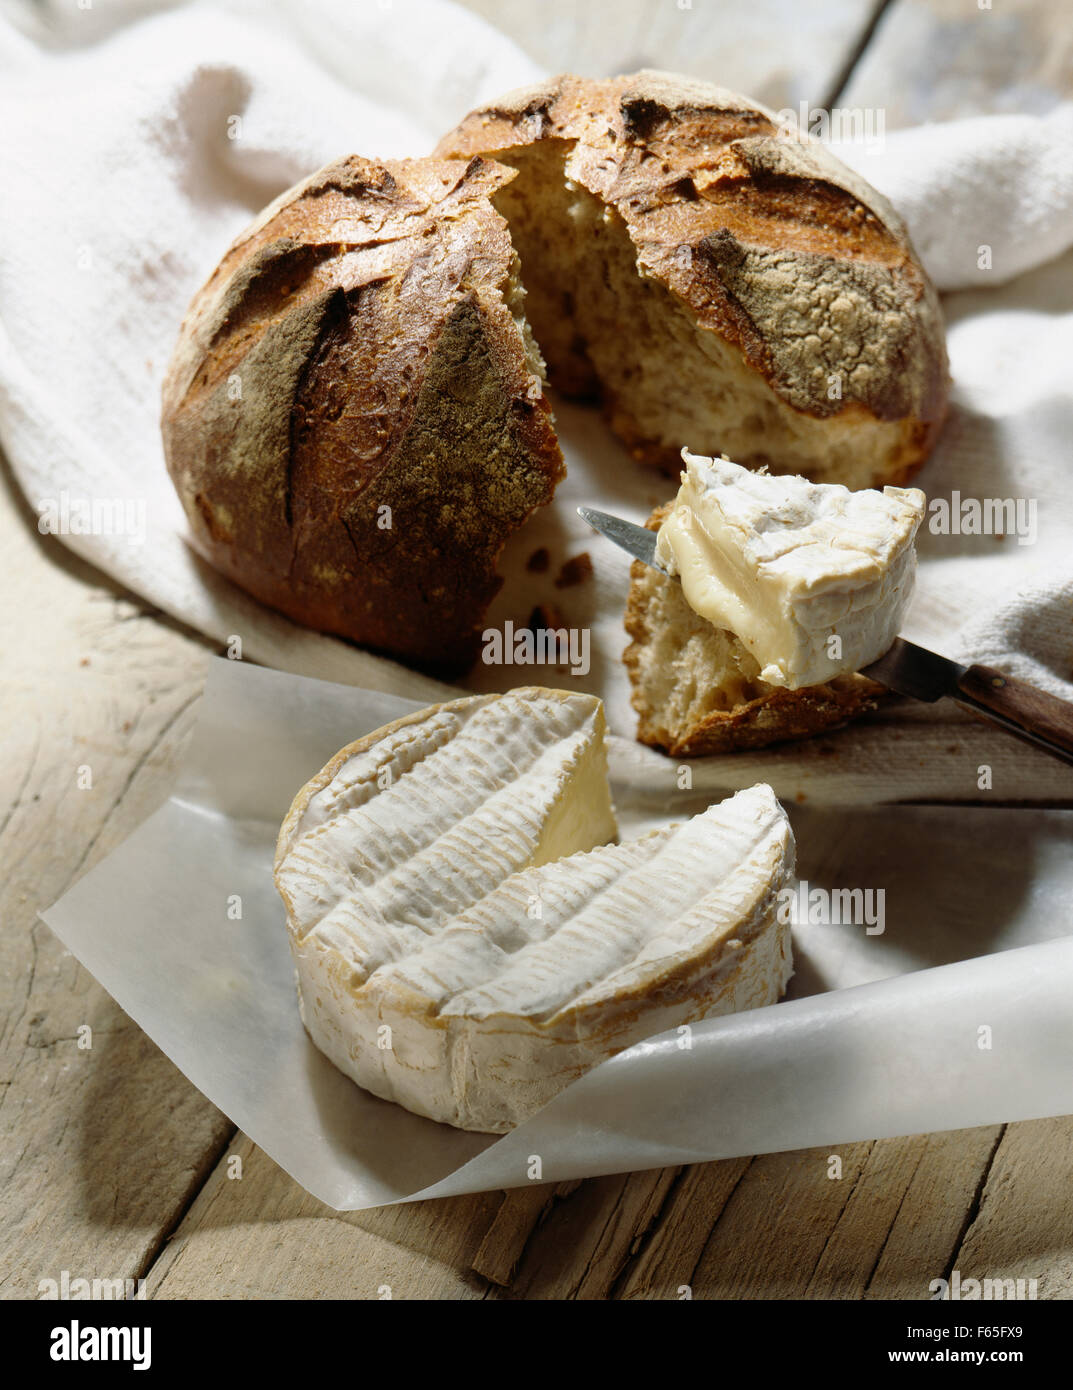 Camembert, bread and knife Stock Photo